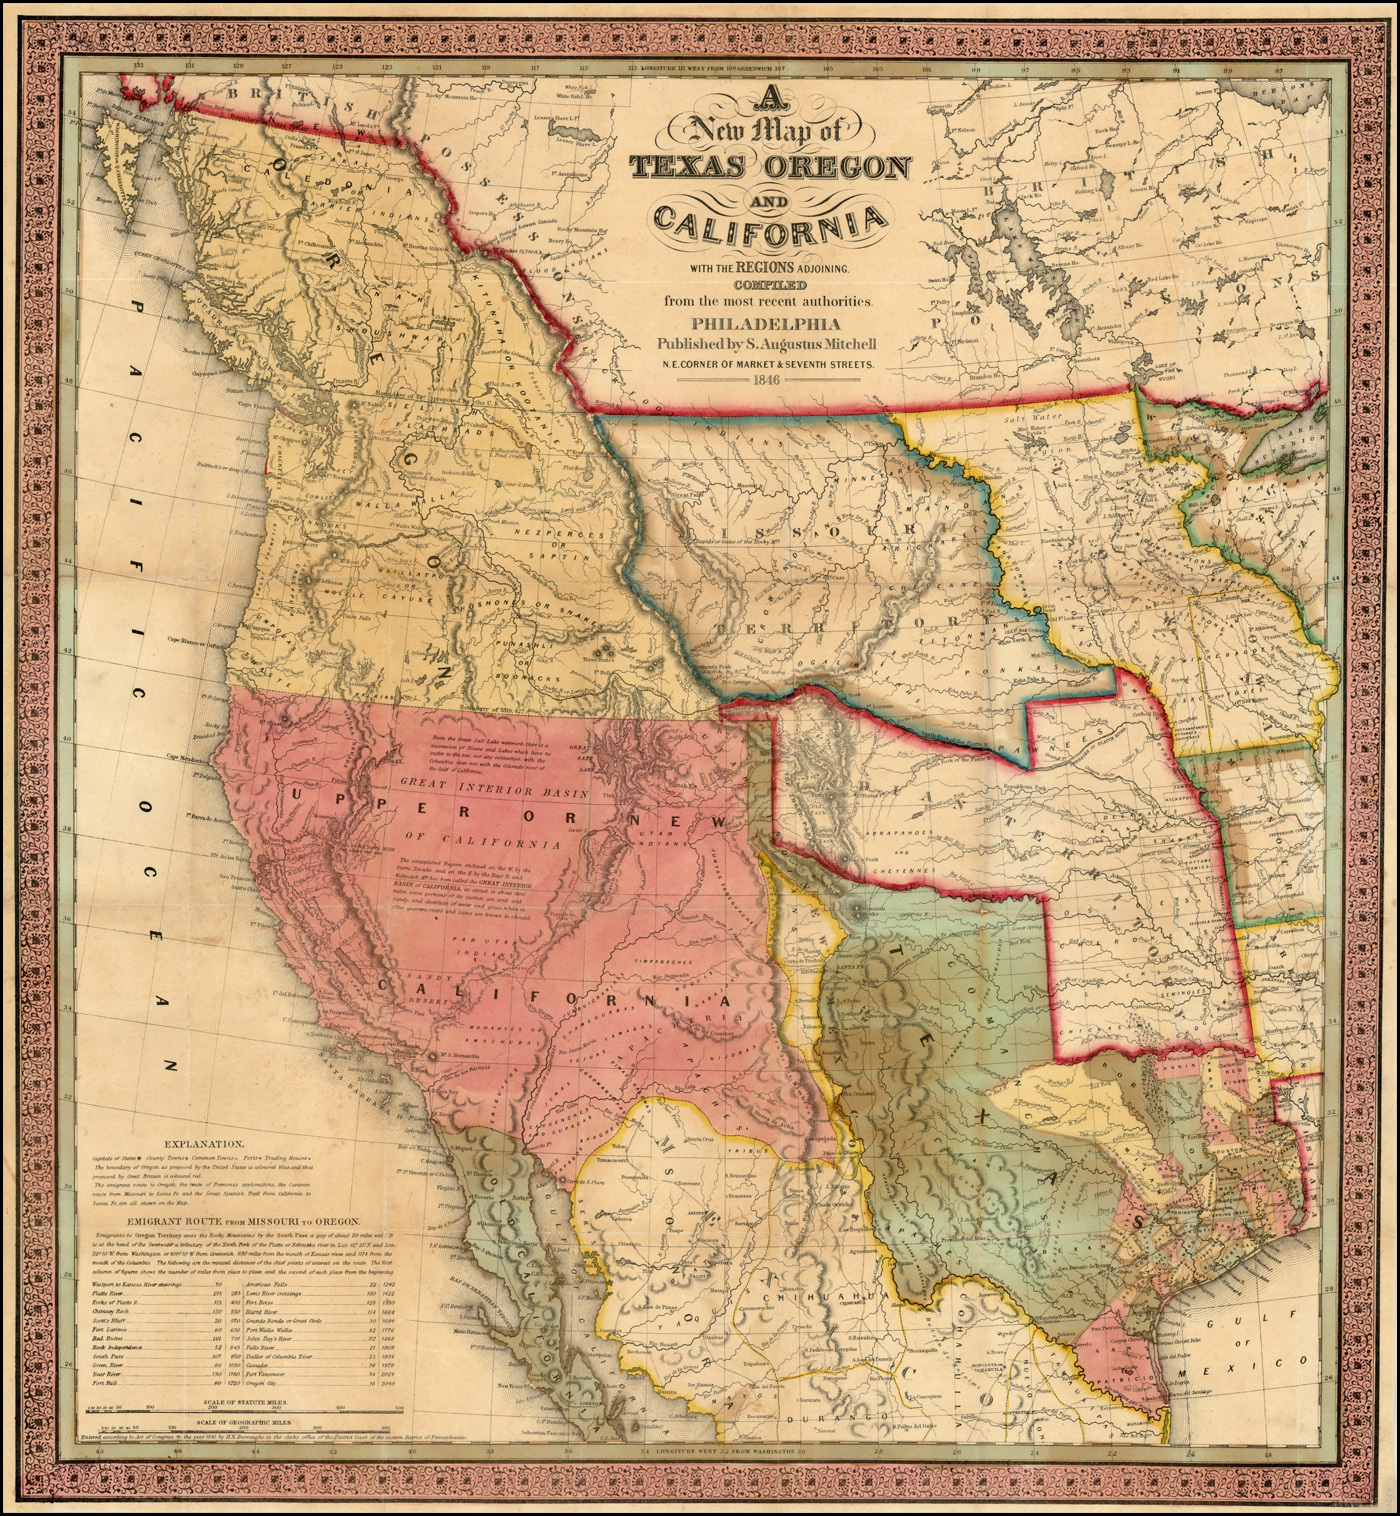 A New Map Of Texas, Oregon And California With The Regions Adjoining - California Territory Map